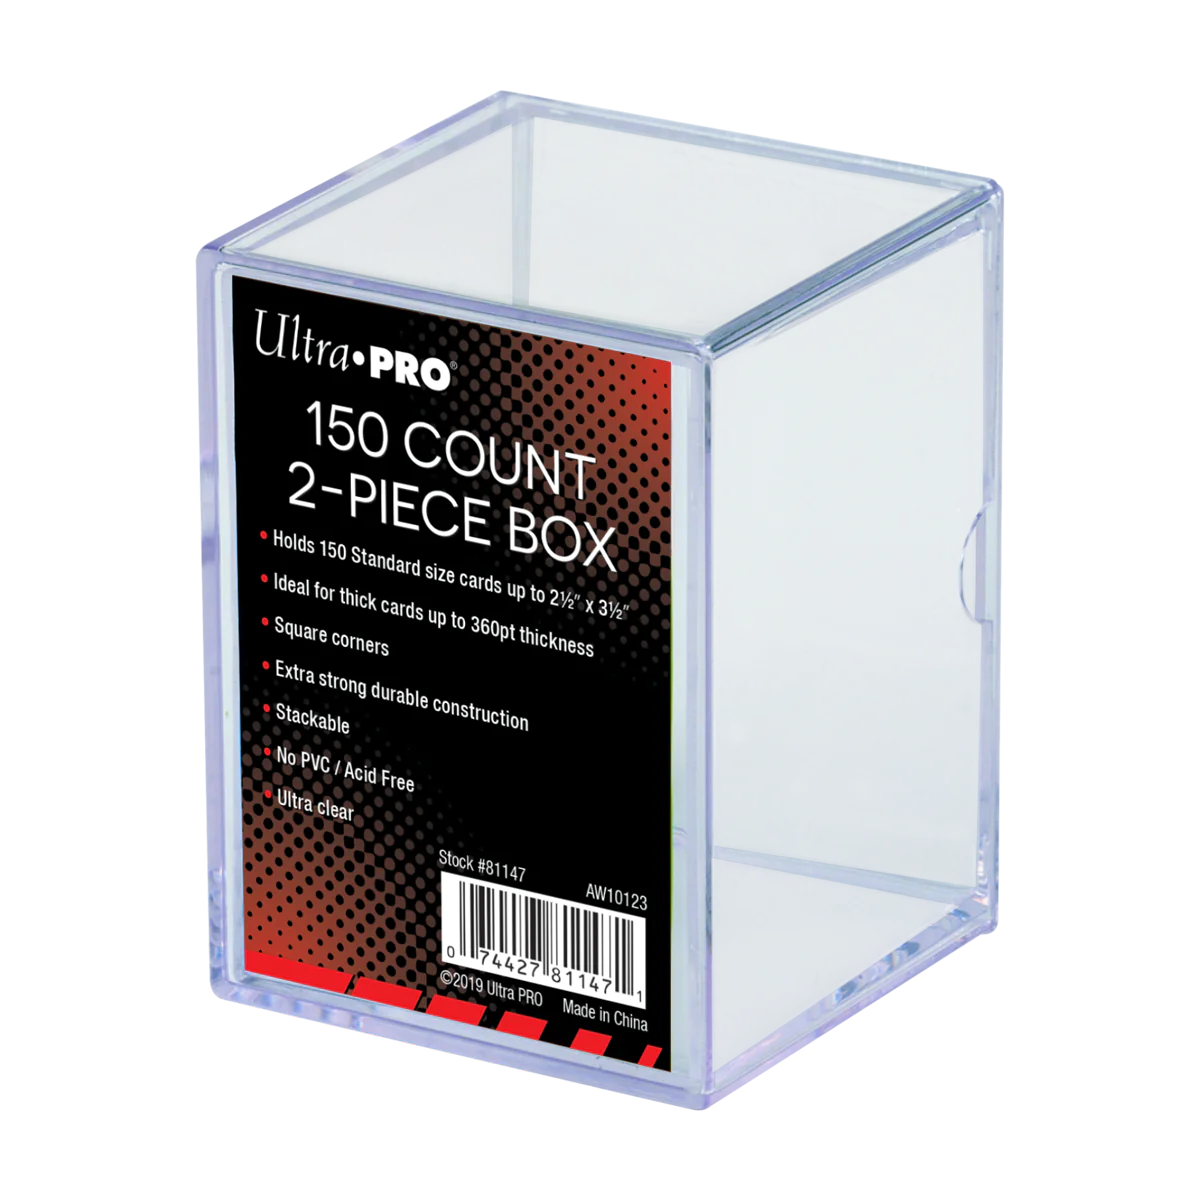 Ultra pro 150 Count 2-Piece Clear Card Storage Box